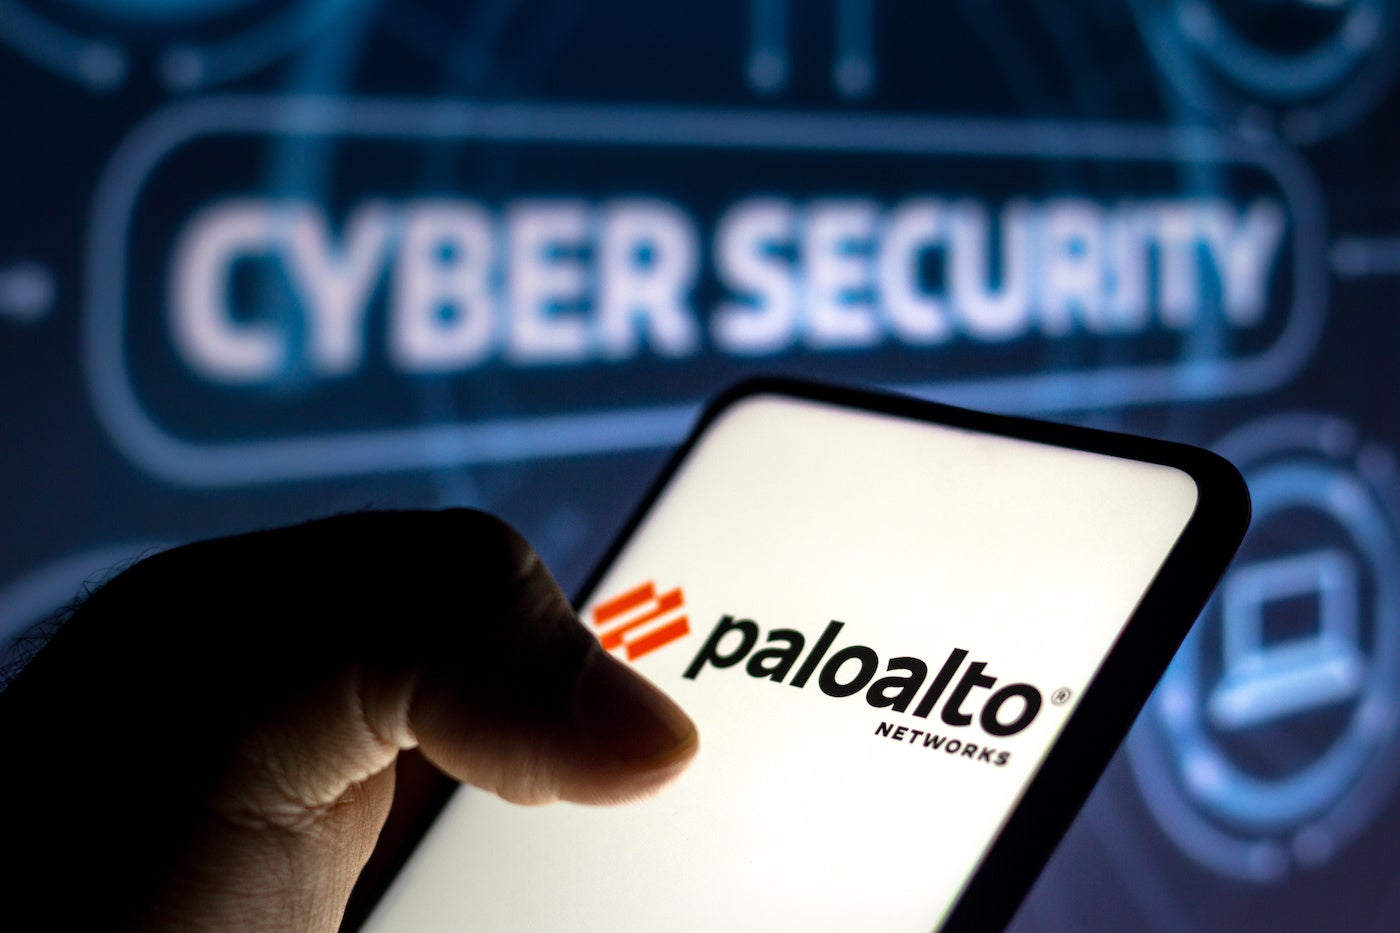 Sticking to traditional security playbook is mistake for cloud security: Palo Alto Networks SVP